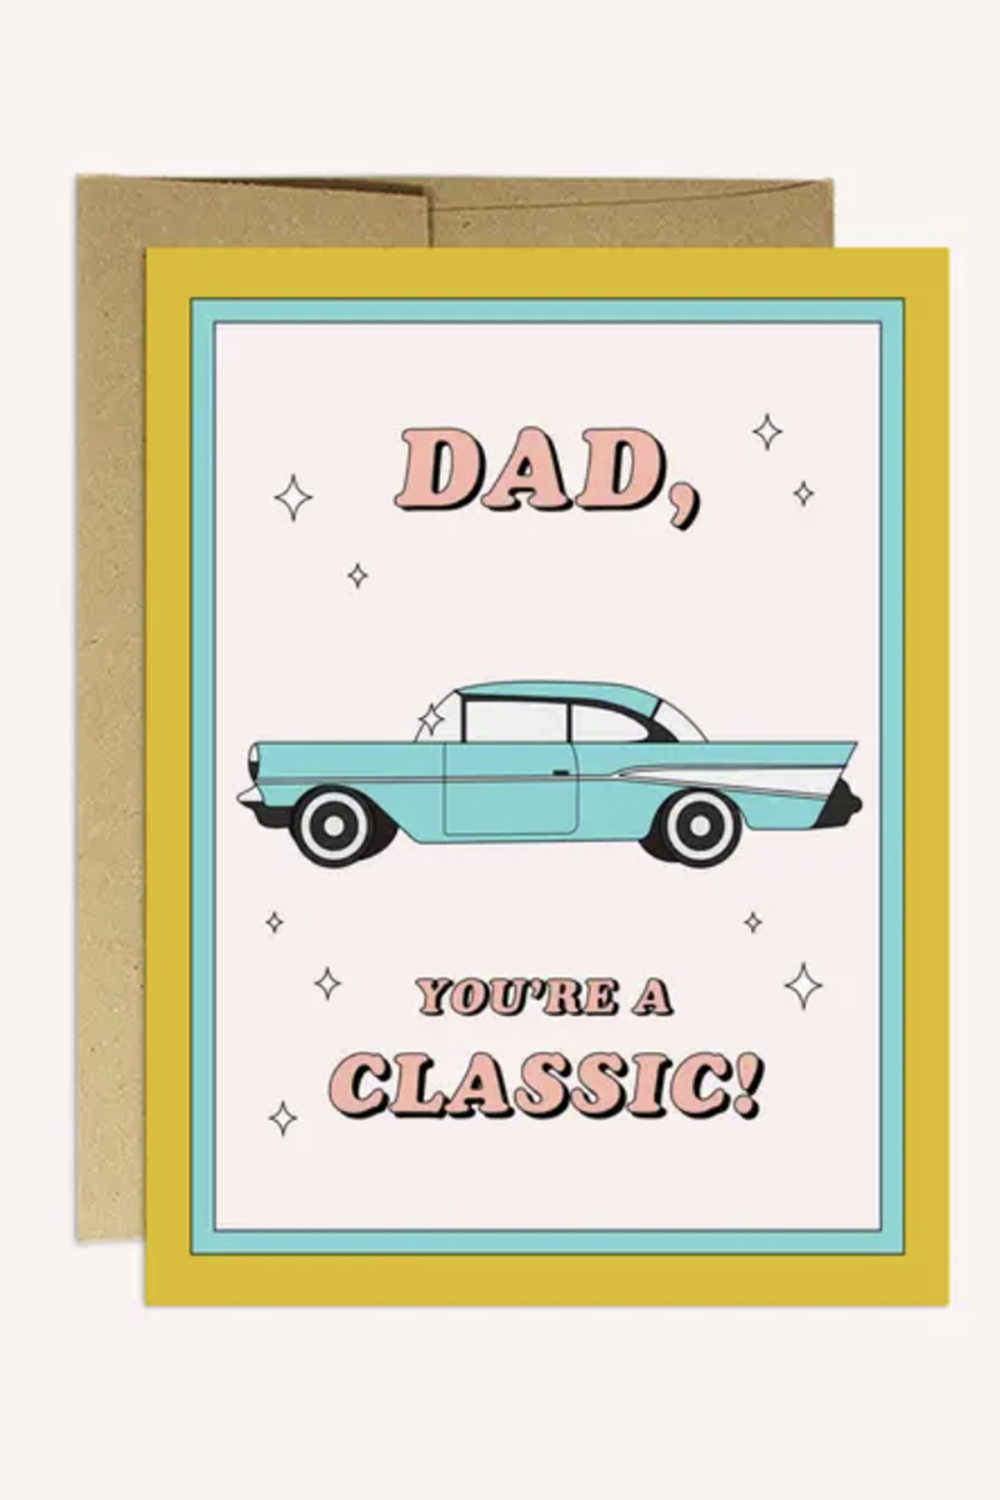 PMP Father's Day Greeting Card - Classic Dad